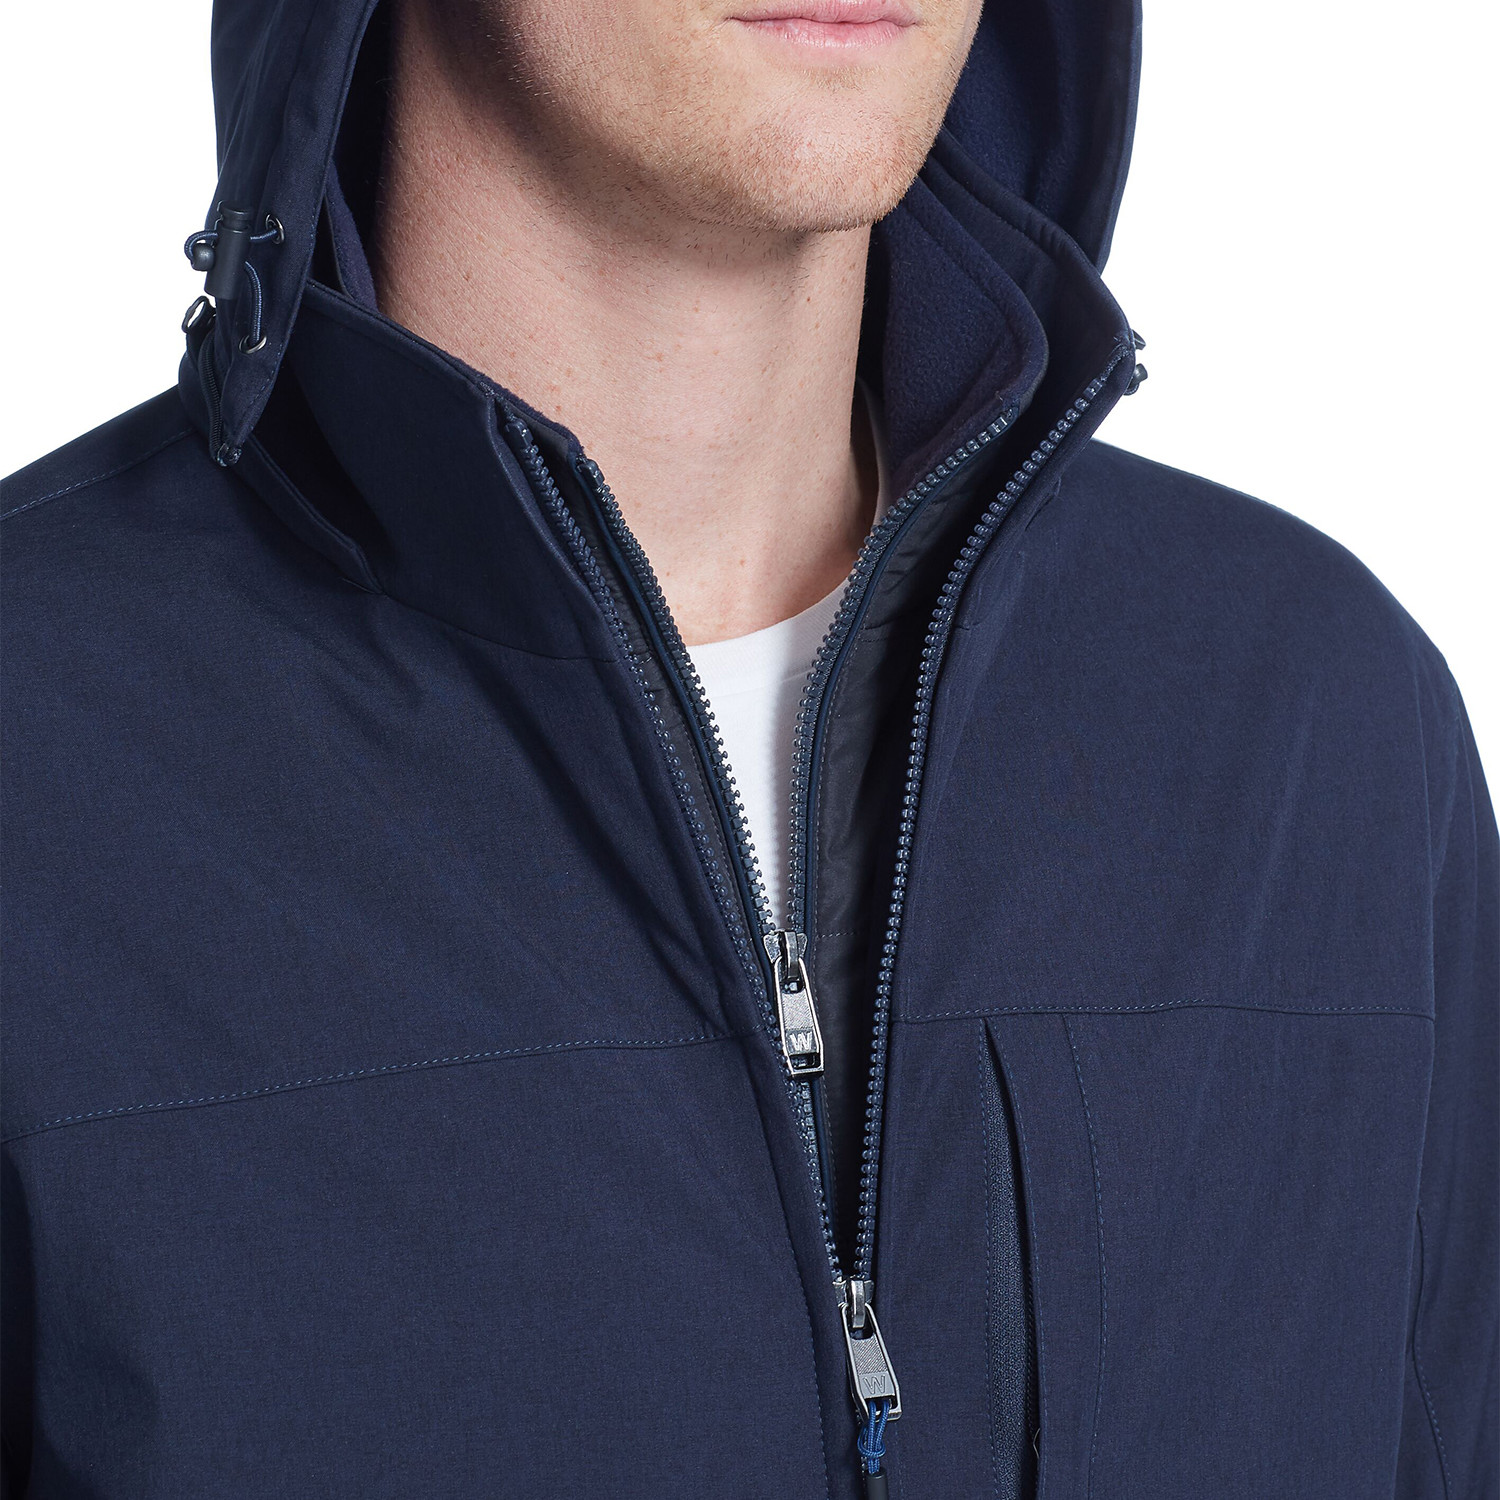 Stretch Tech Jacket // Navy Heather (S) - The Very Warm - Touch of Modern